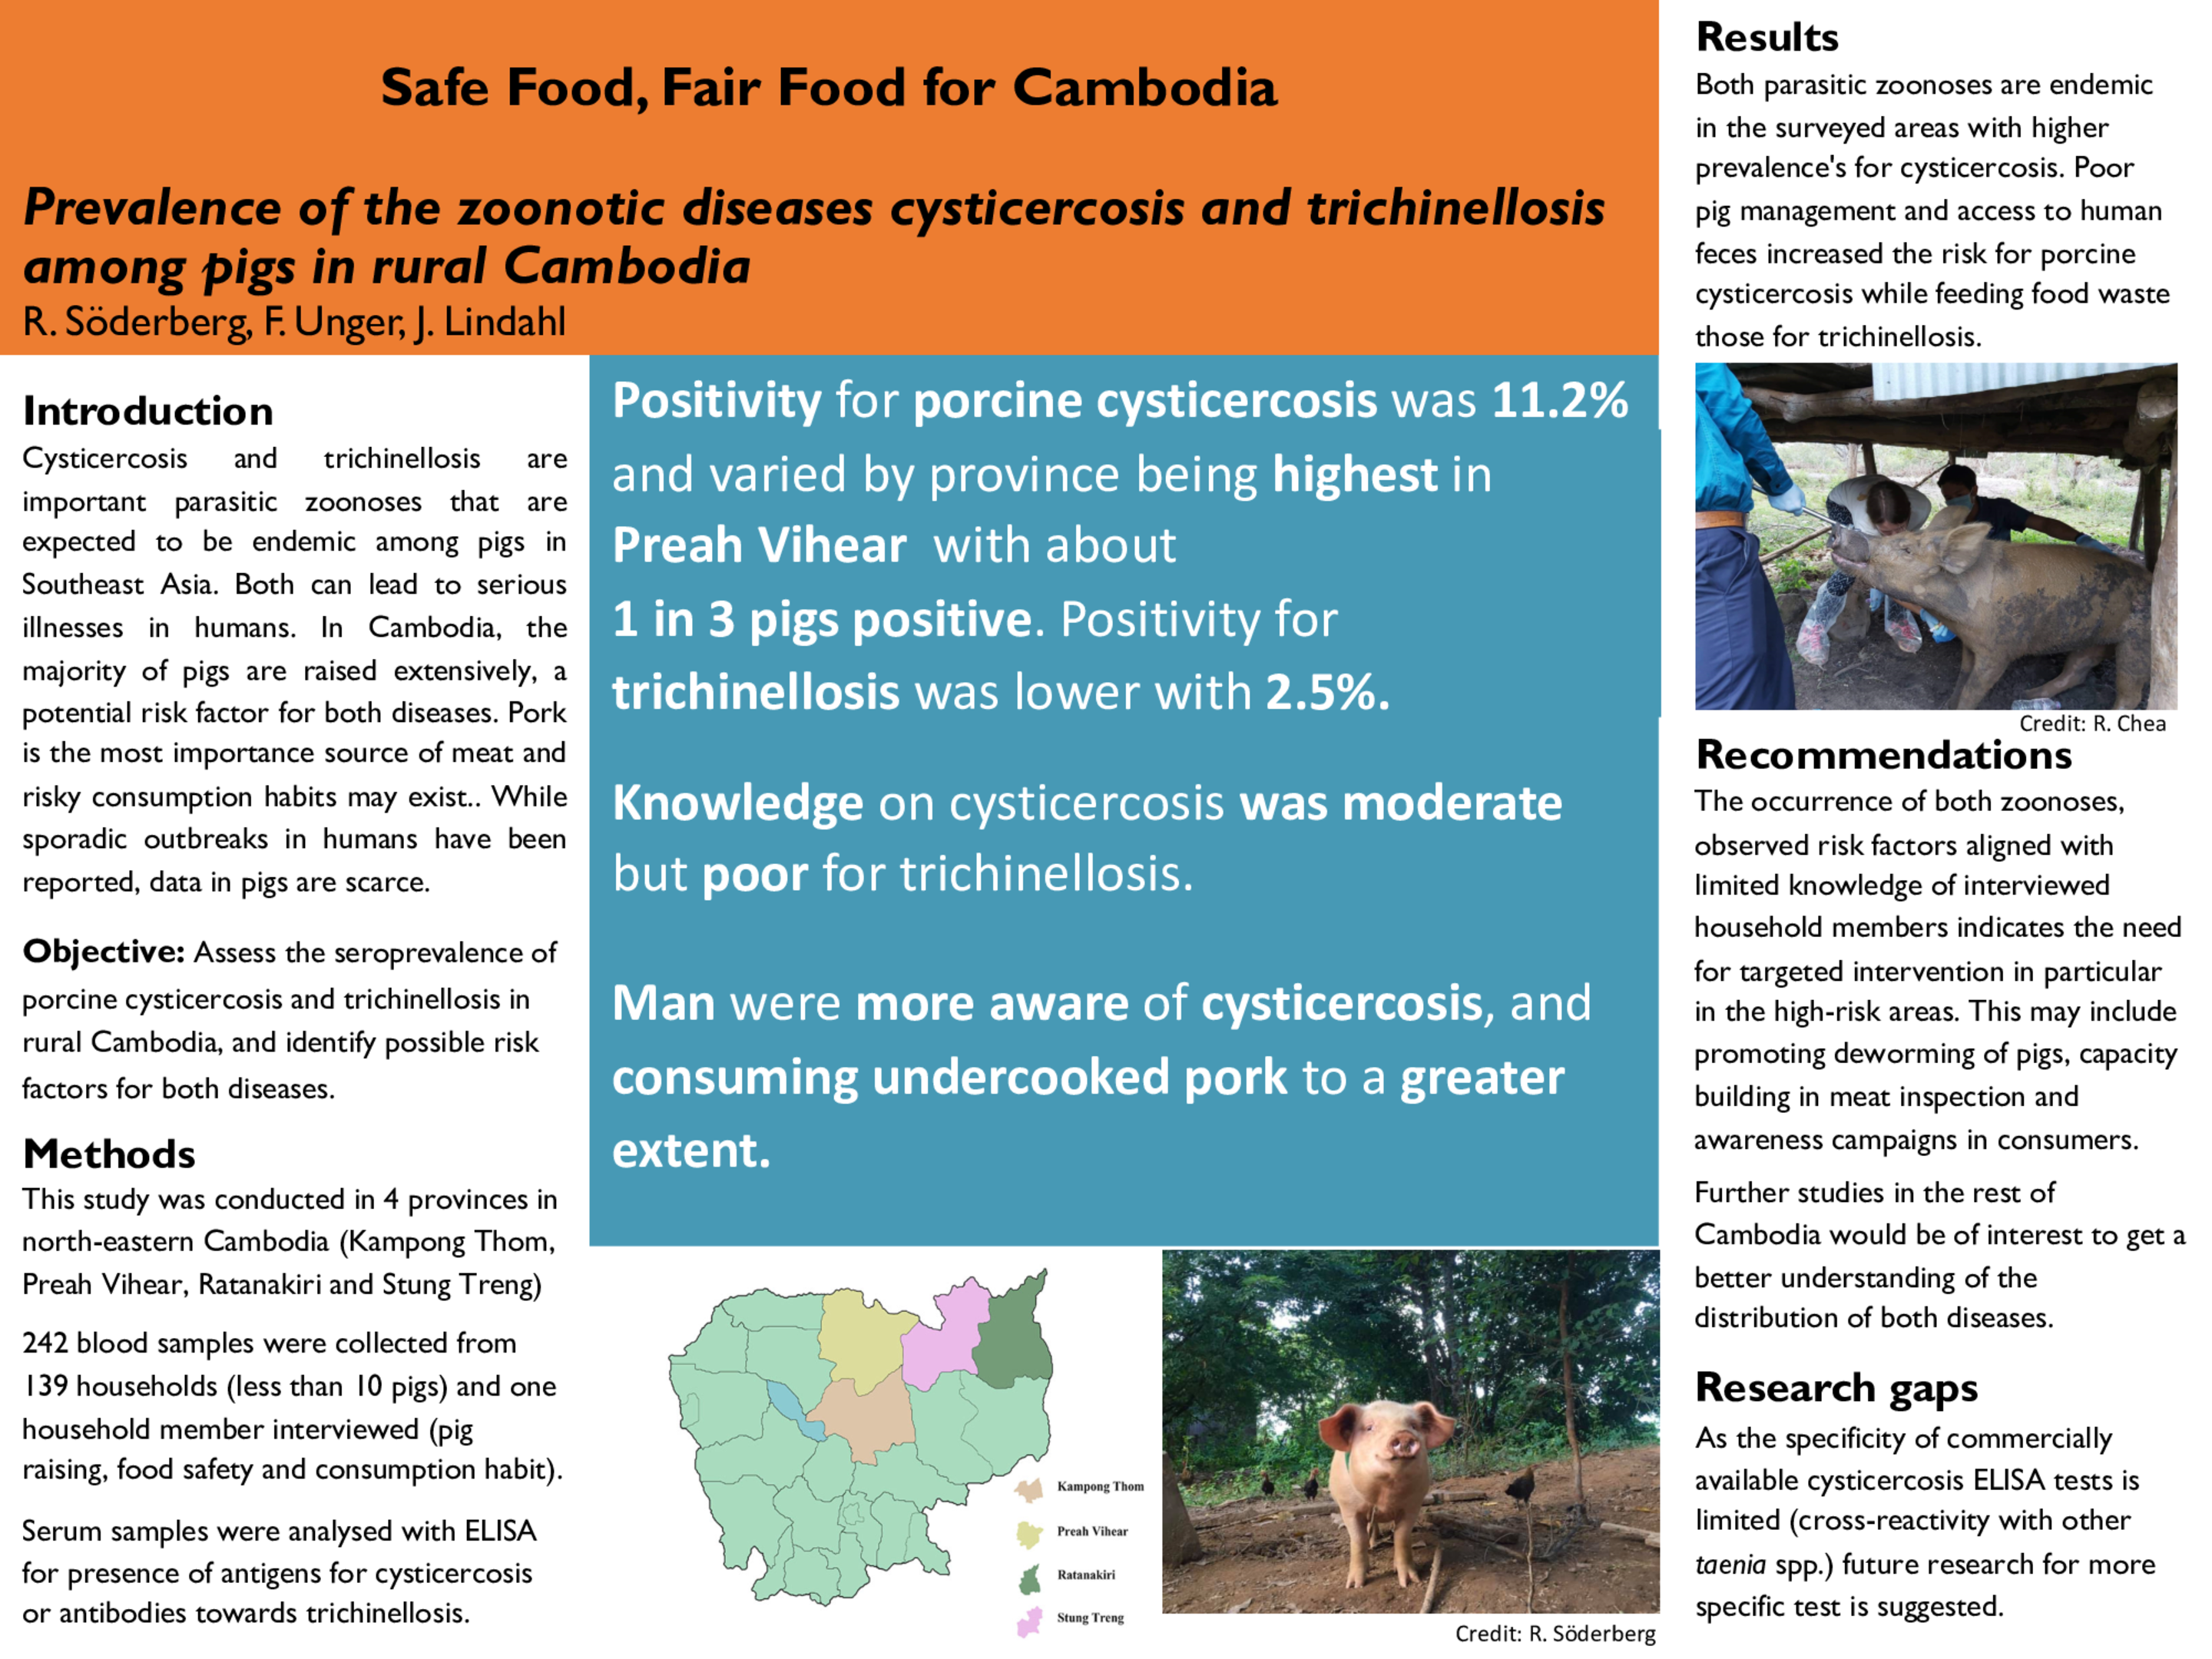 Safe Food, Fair Food for Cambodia - Prevalence of the zoonotic diseases cysticercosis and trichinellosis among pigs in rural Cambodia